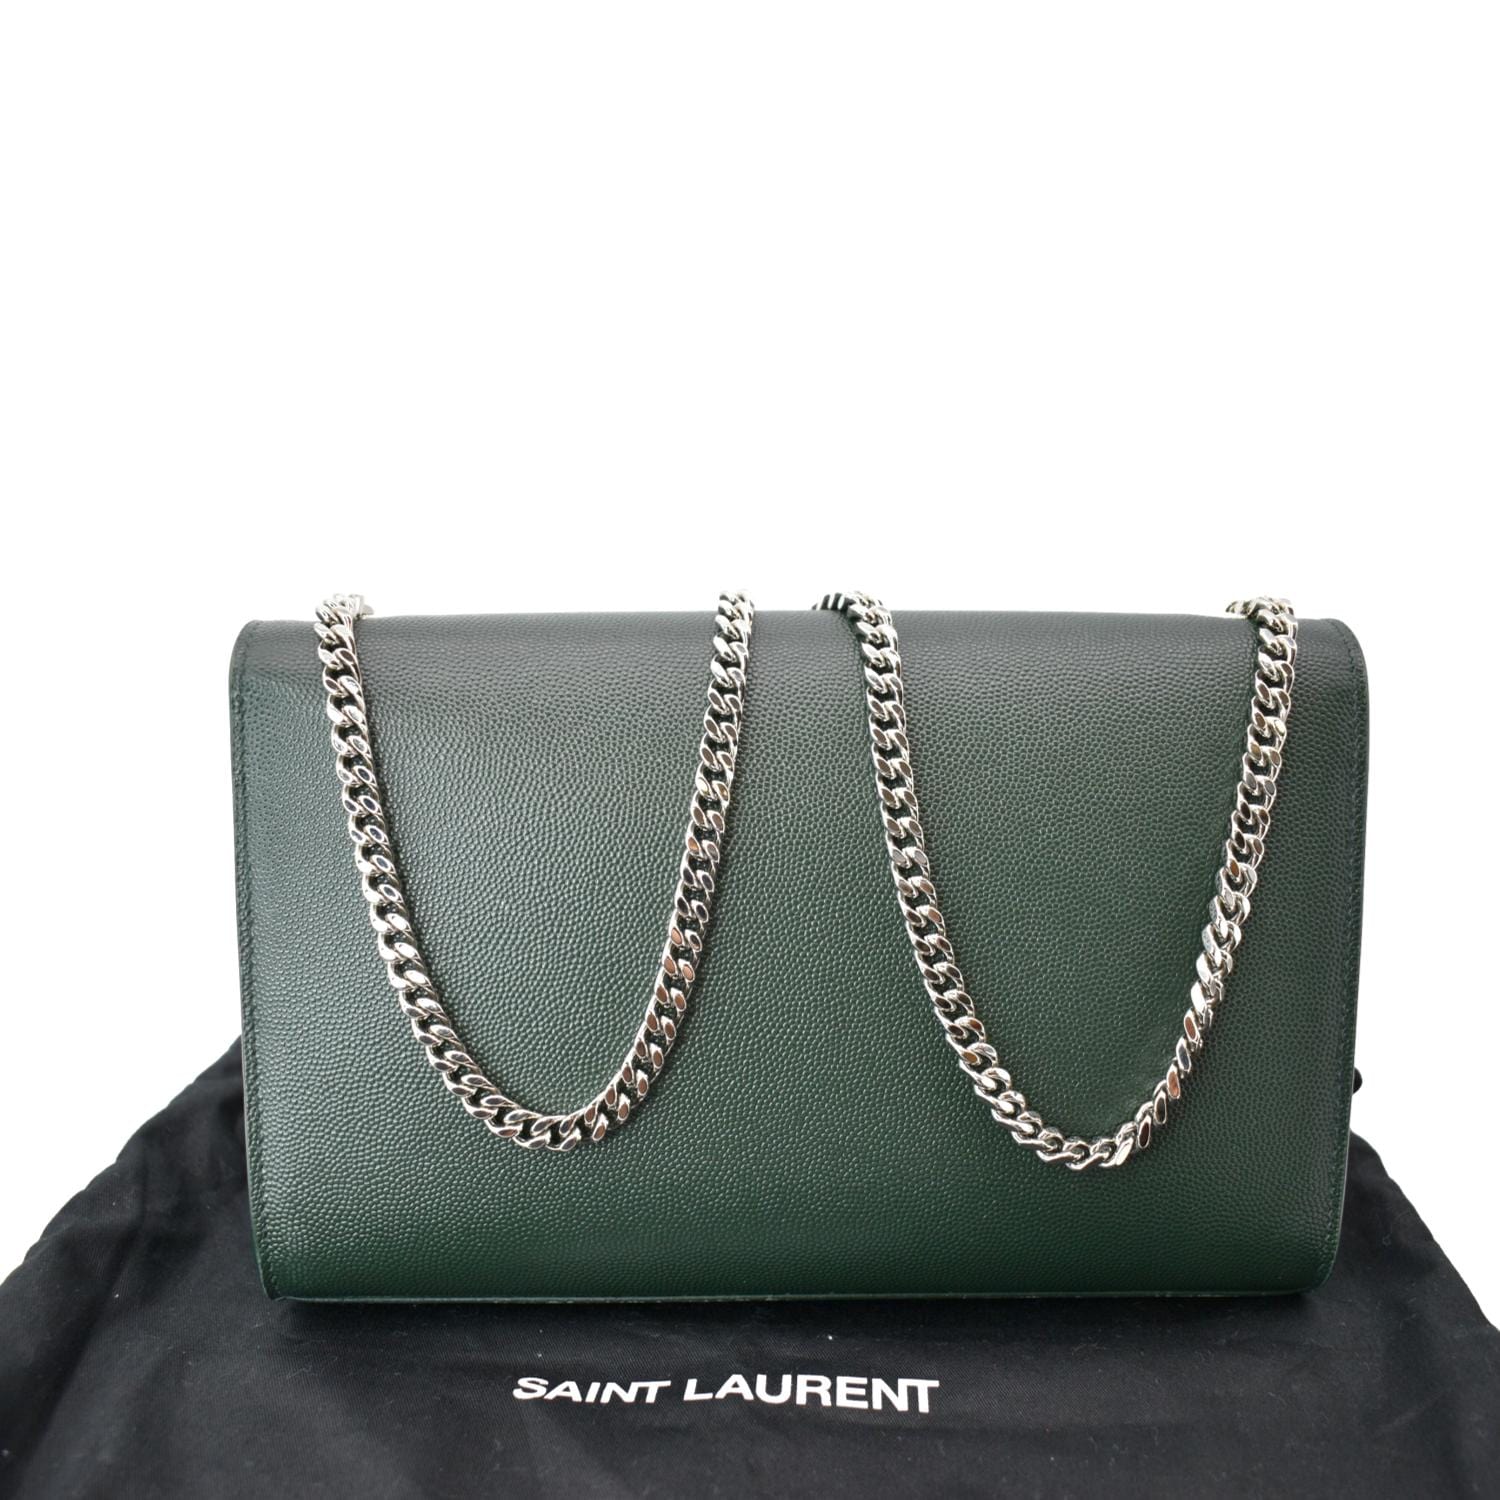 SAINT LAURENT Olive green Kate Medium bag in tanned leather